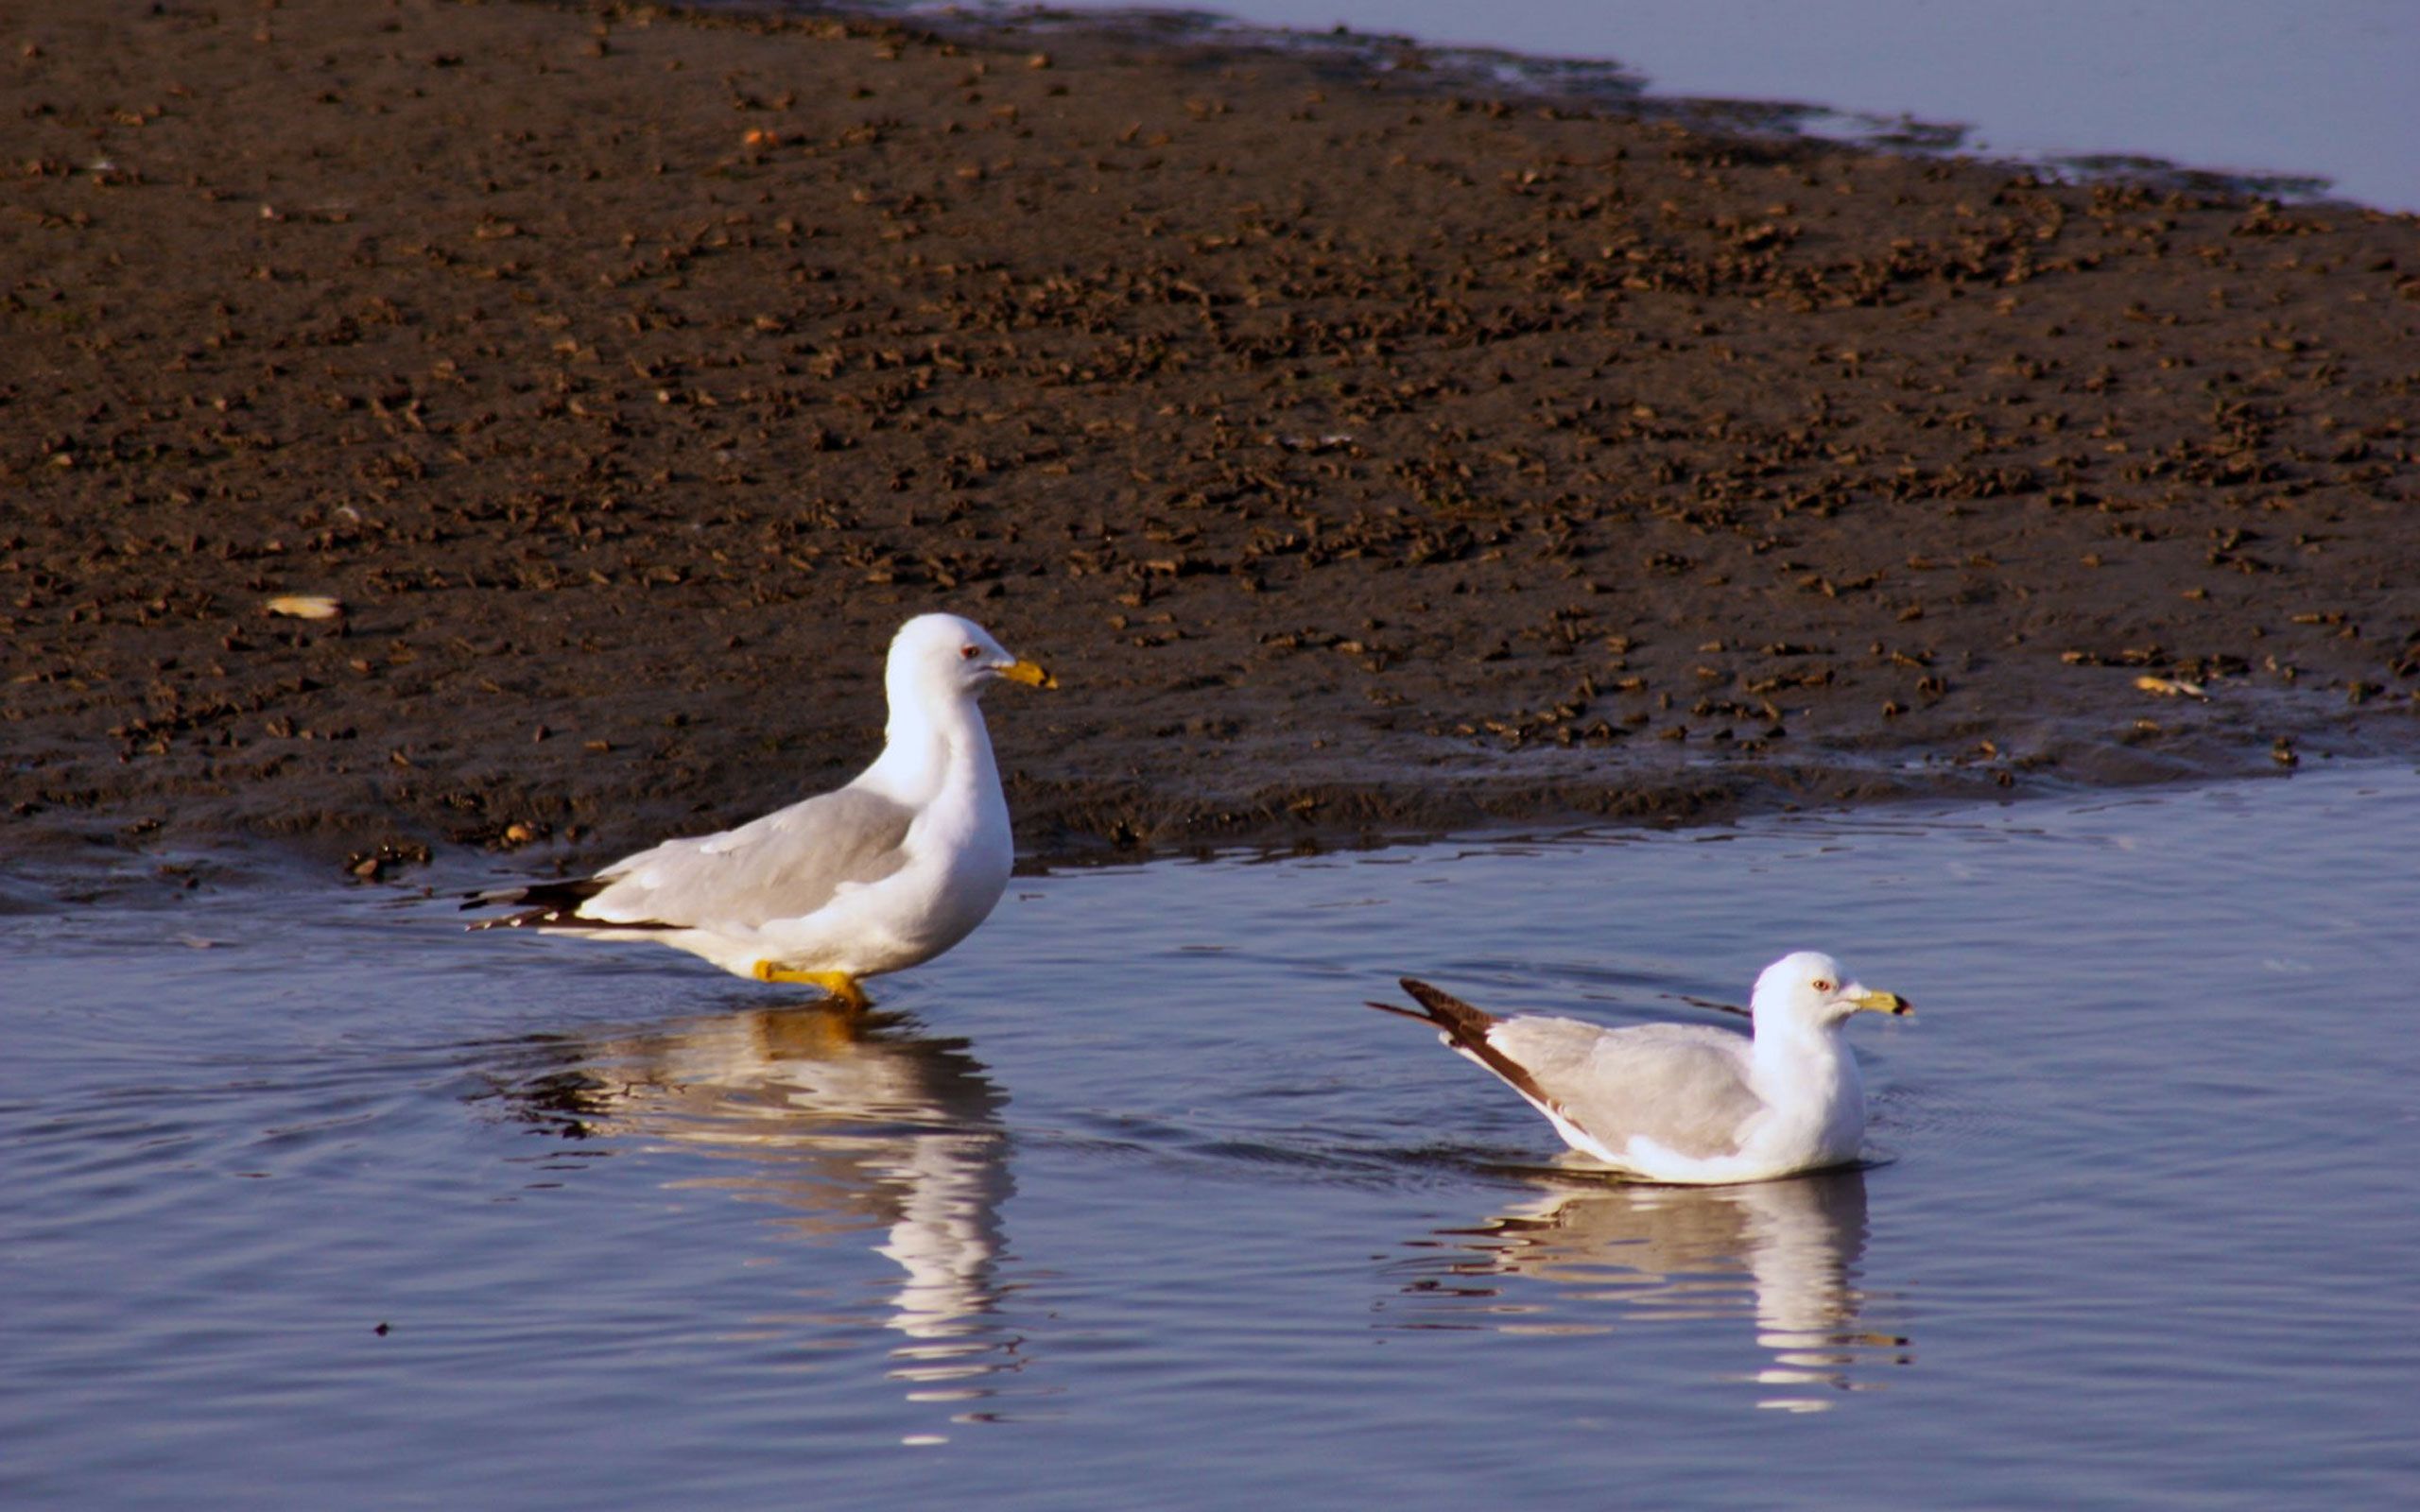 Gulls on the water